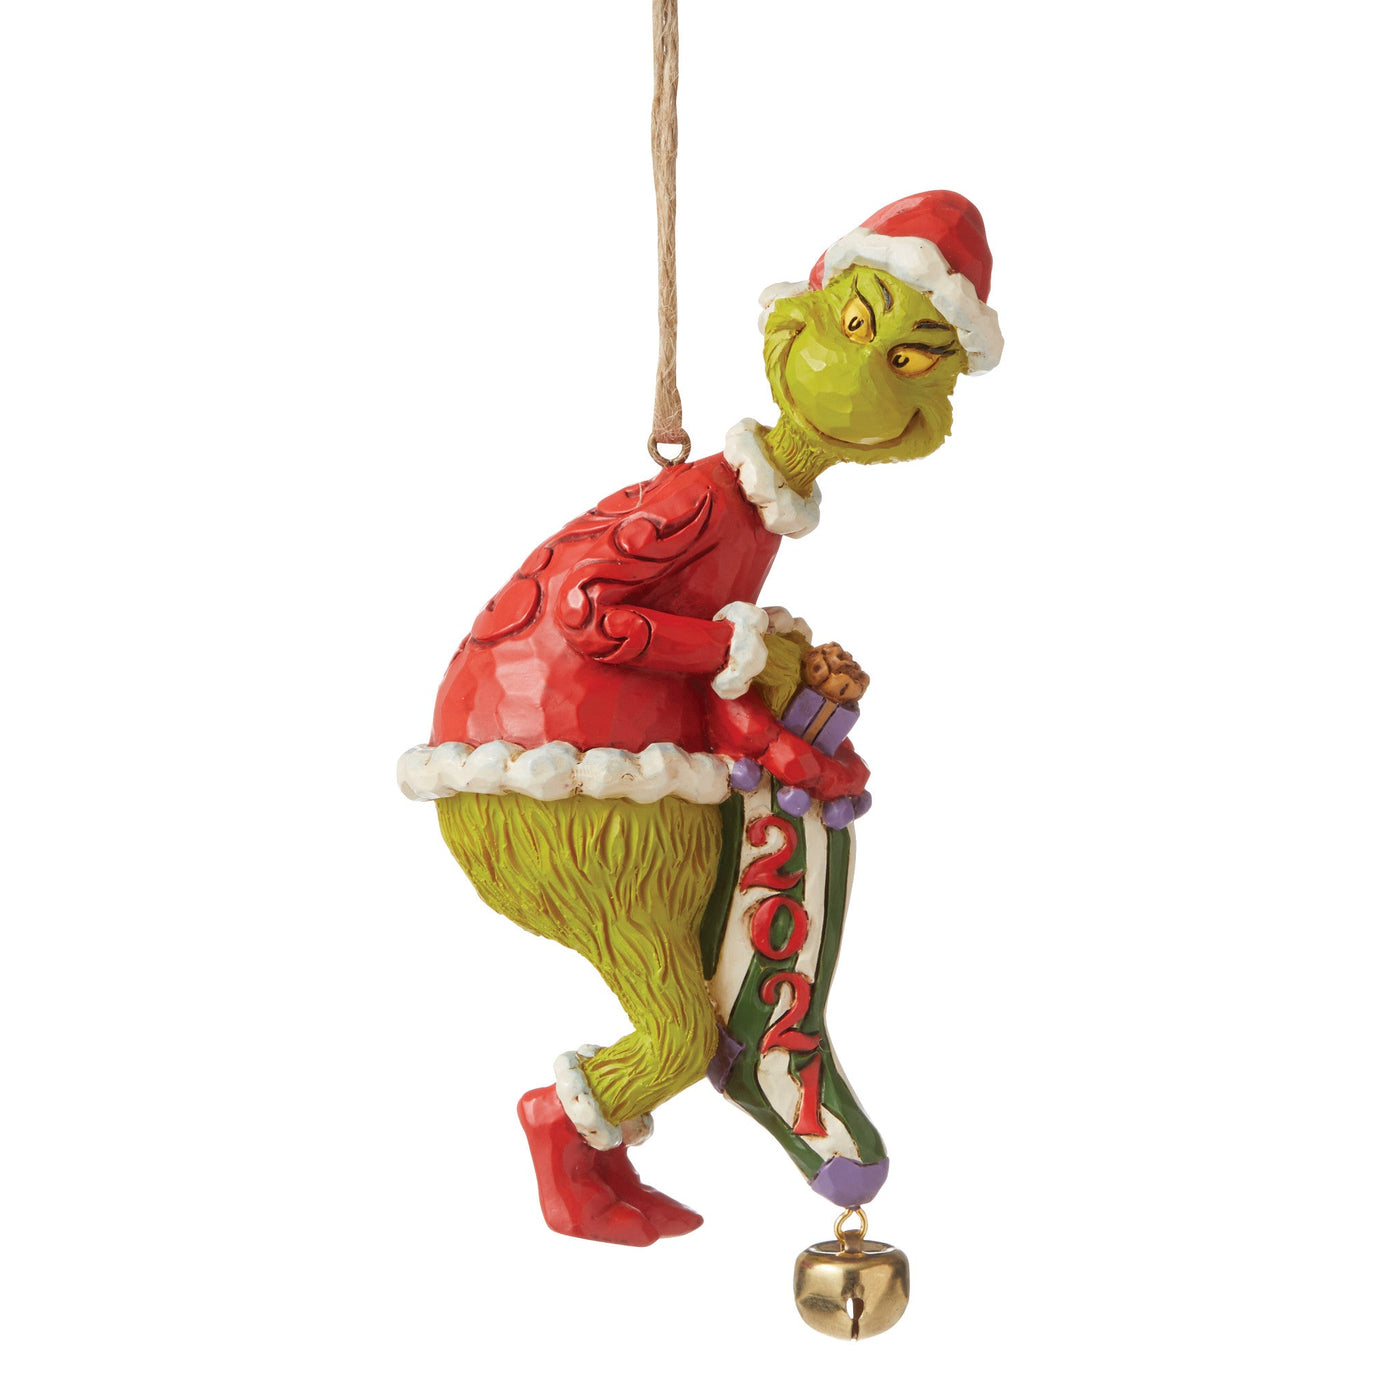 Grinch Holding Wreath, Grinch Juggling Ornaments & Grinch with Stocking